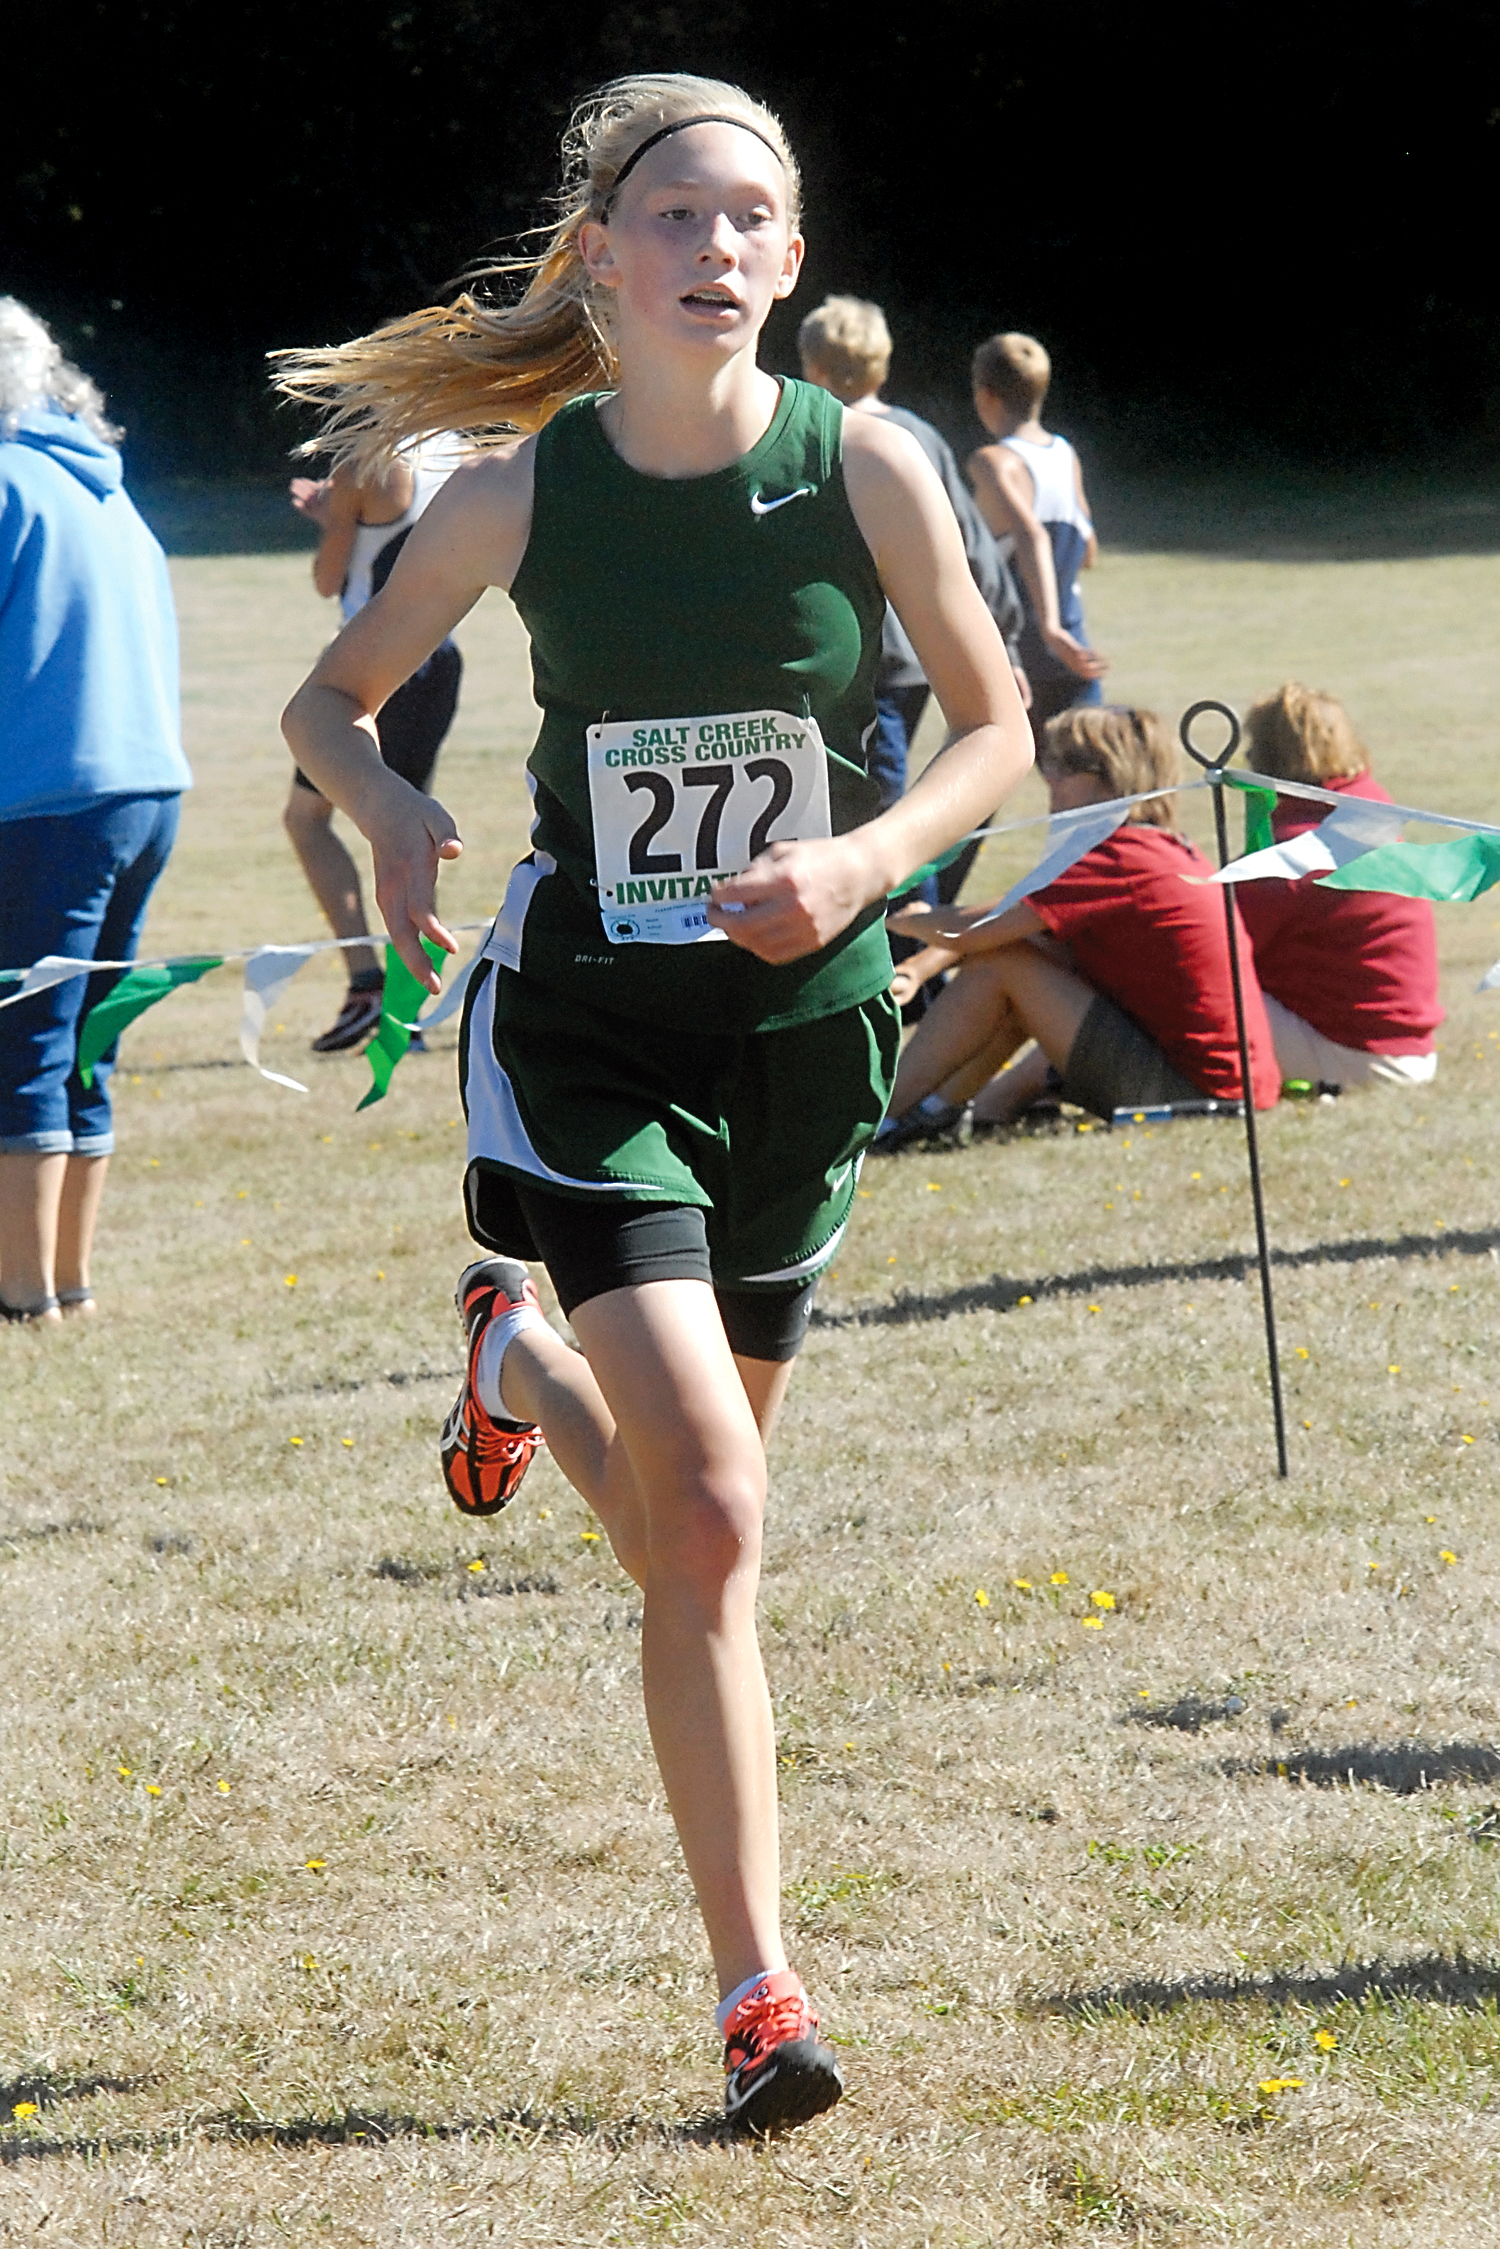 Port Angeles freshman Gracie Long runs to a second-place finish at the Salt Creek Invitational in September. Long won league and district titles this season. (Keith Thorpe/Peninsula Daily News)